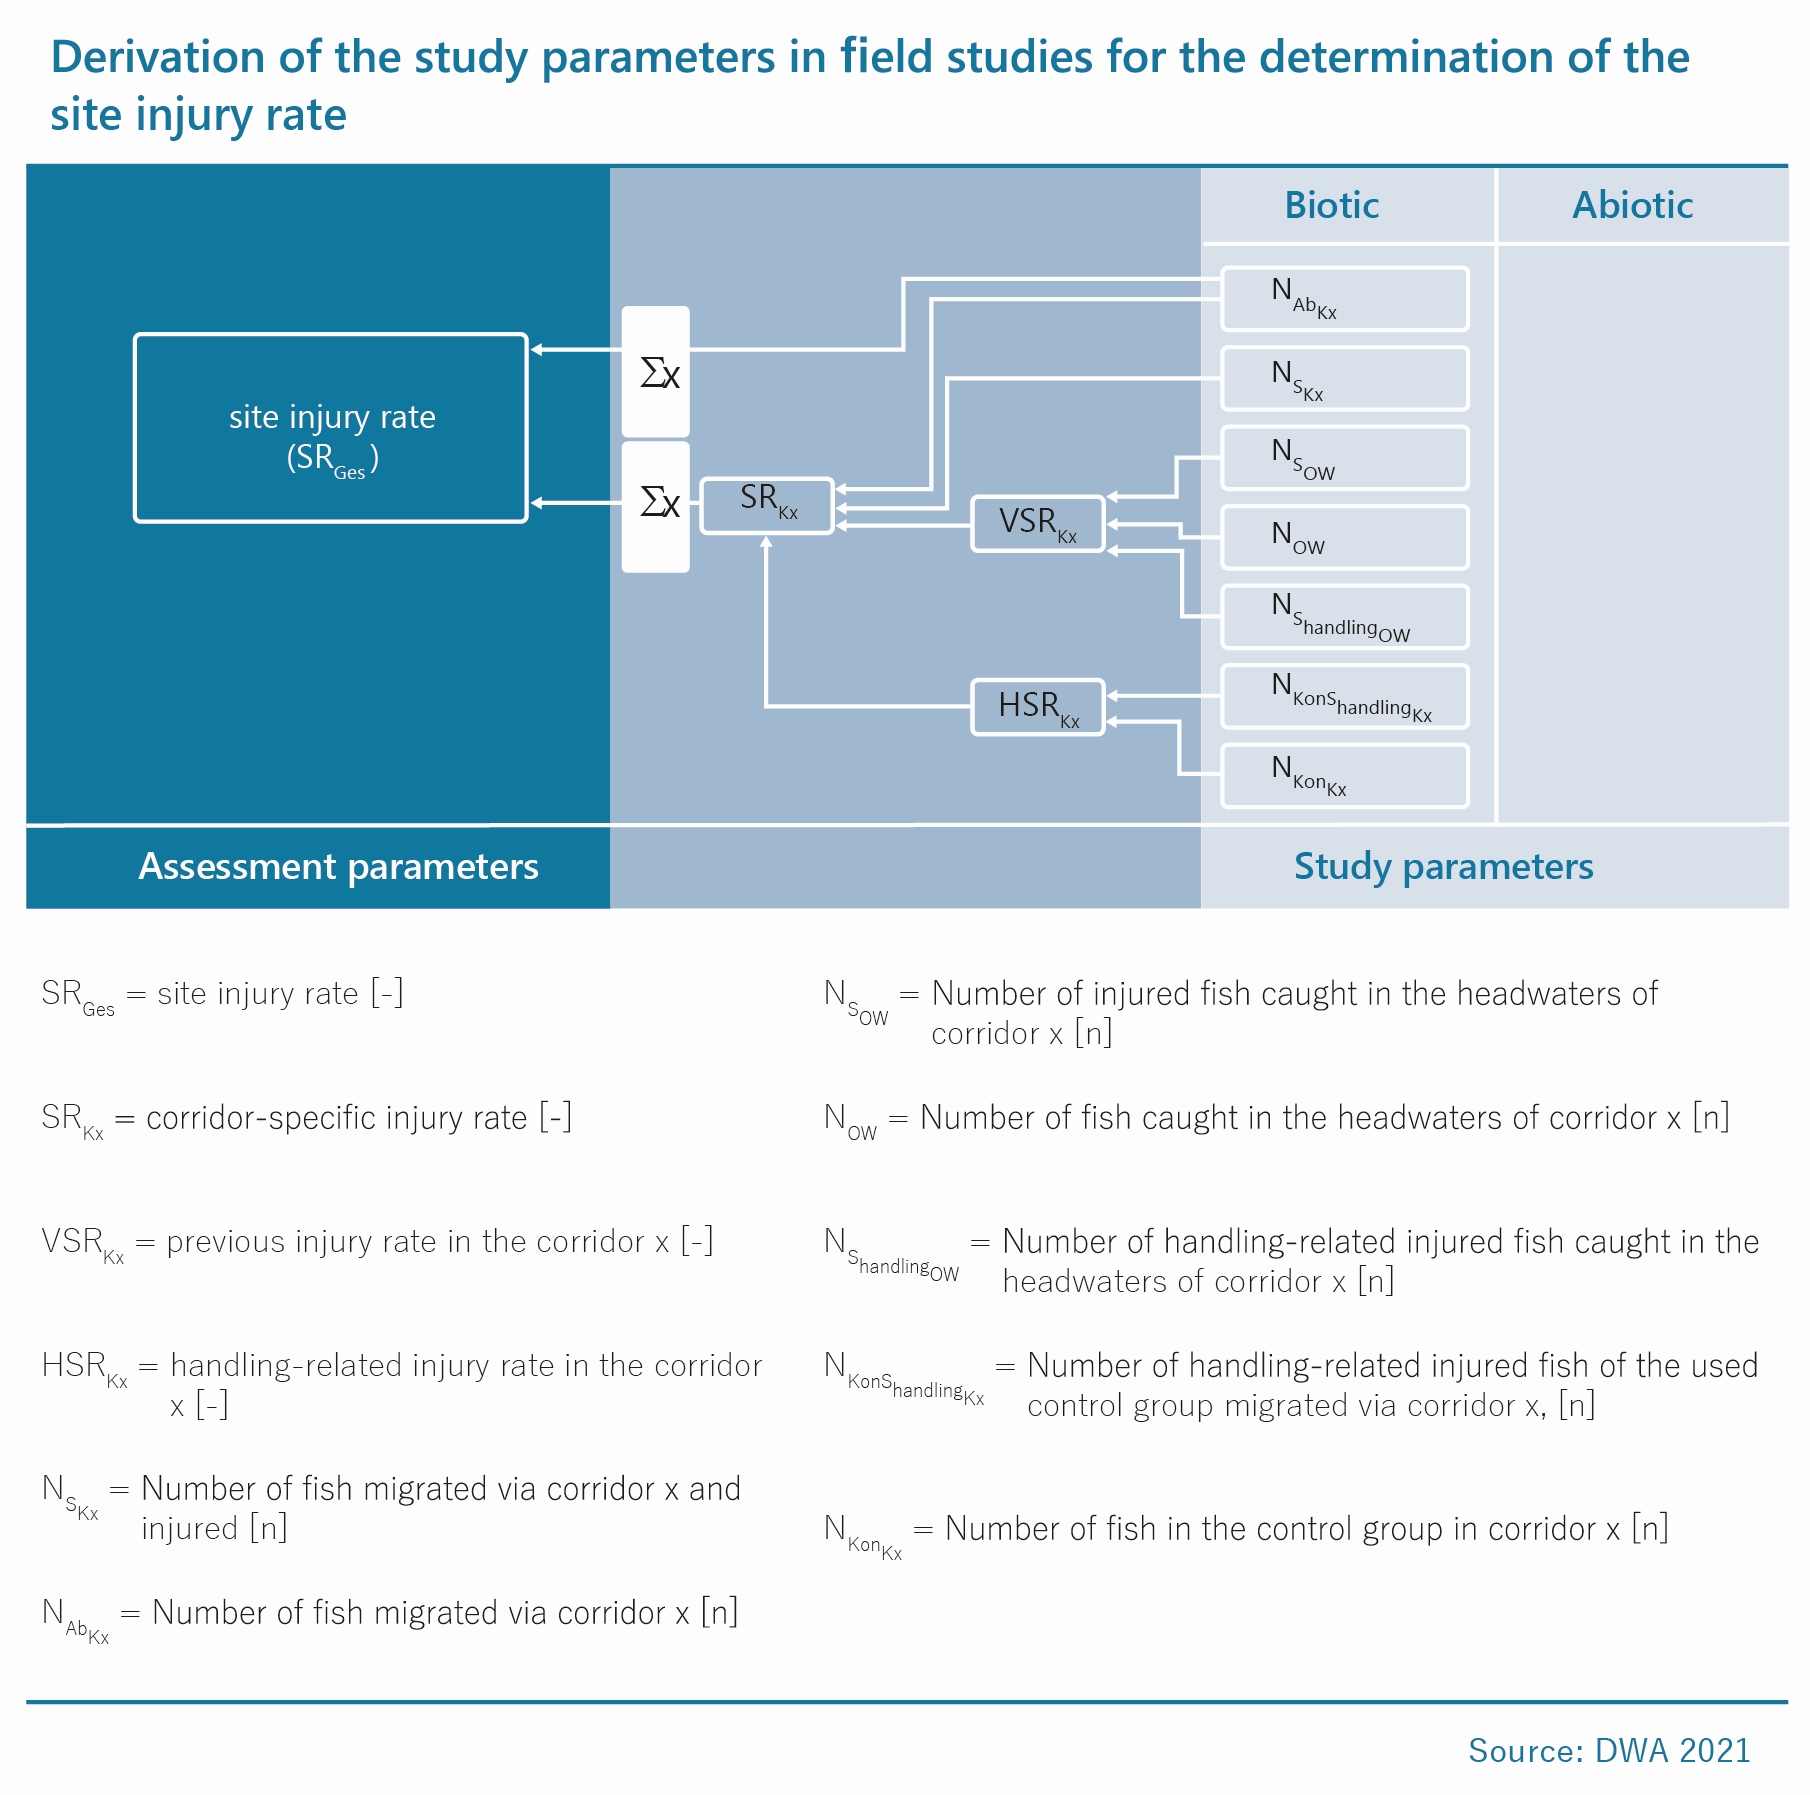 Infographic on Derivation of the Study Parameters in Field Studies for the Determination of the Site Injury Rate